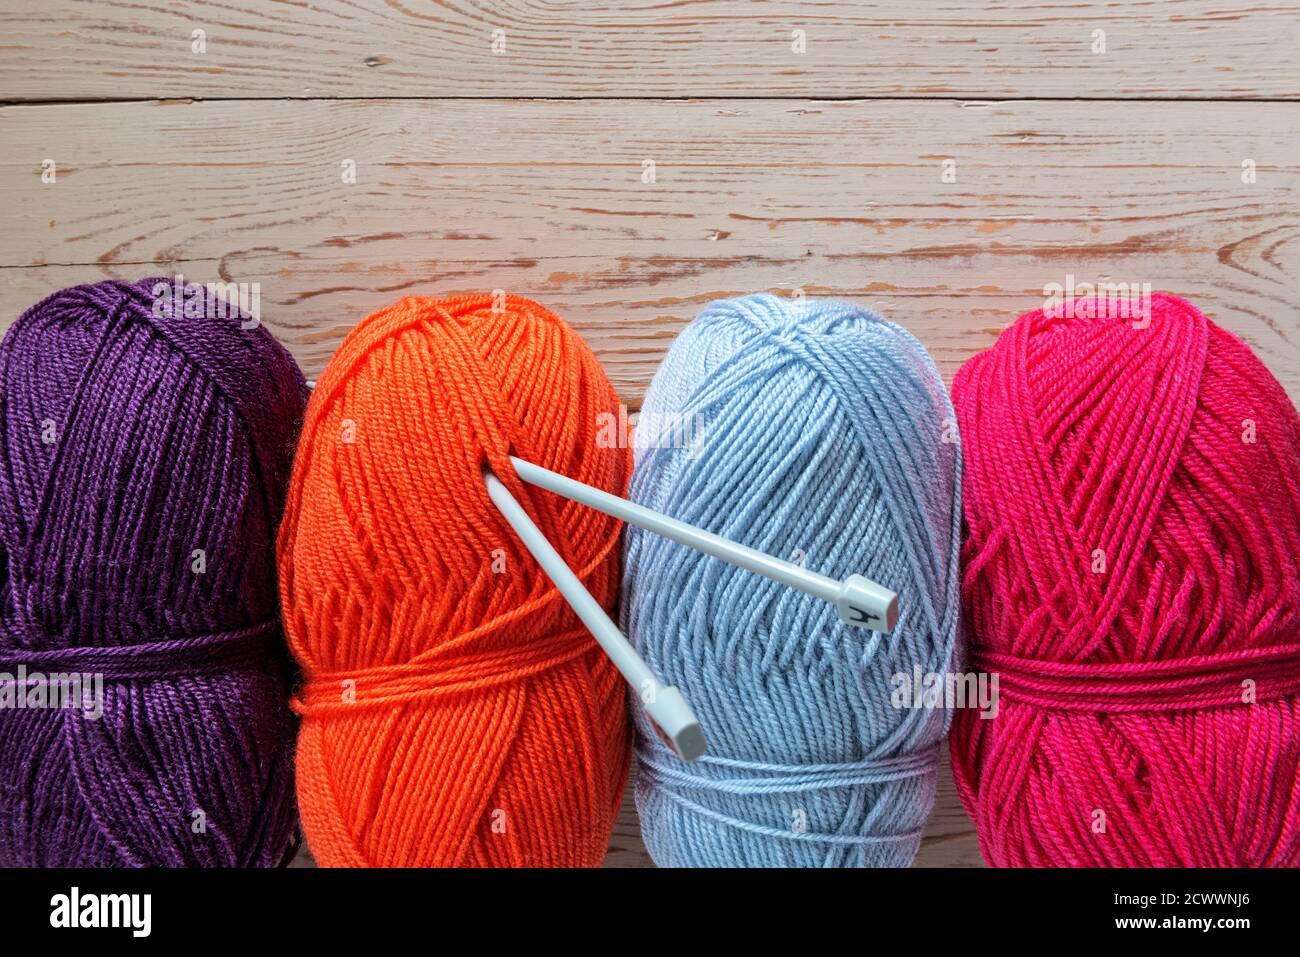 Four brightly coloured balls of knitting wool. Stock Photo